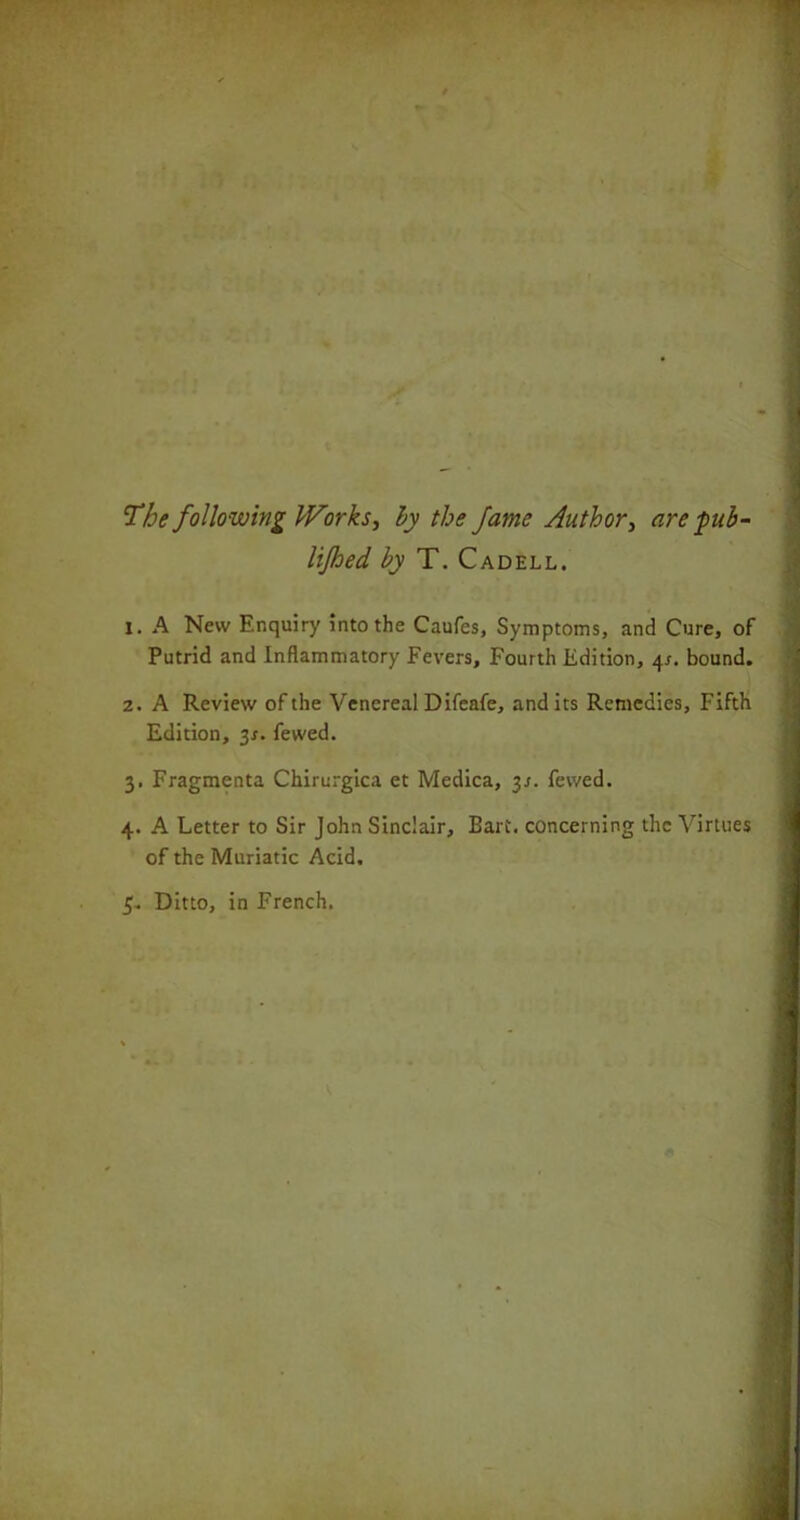 The following Works, by the fame Author, are pub - lijhed by T. Cadell. X. A New Enquiry into the Caufes, Symptoms, and Cure, of Putrid and Inflammatory Fevers, Fourth Edition, 4s. bound. 2. A Review of the Venereal Difeafe, andits Remedies, Fifth Edition, 3*. fewed. 3. Fragmenta Chirurgica et Medica, 3s. fewed. 4. A Letter to Sir John Sinclair, Bart, concerning the Virtues of the Muriatic Acid. 3. Ditto, in French.